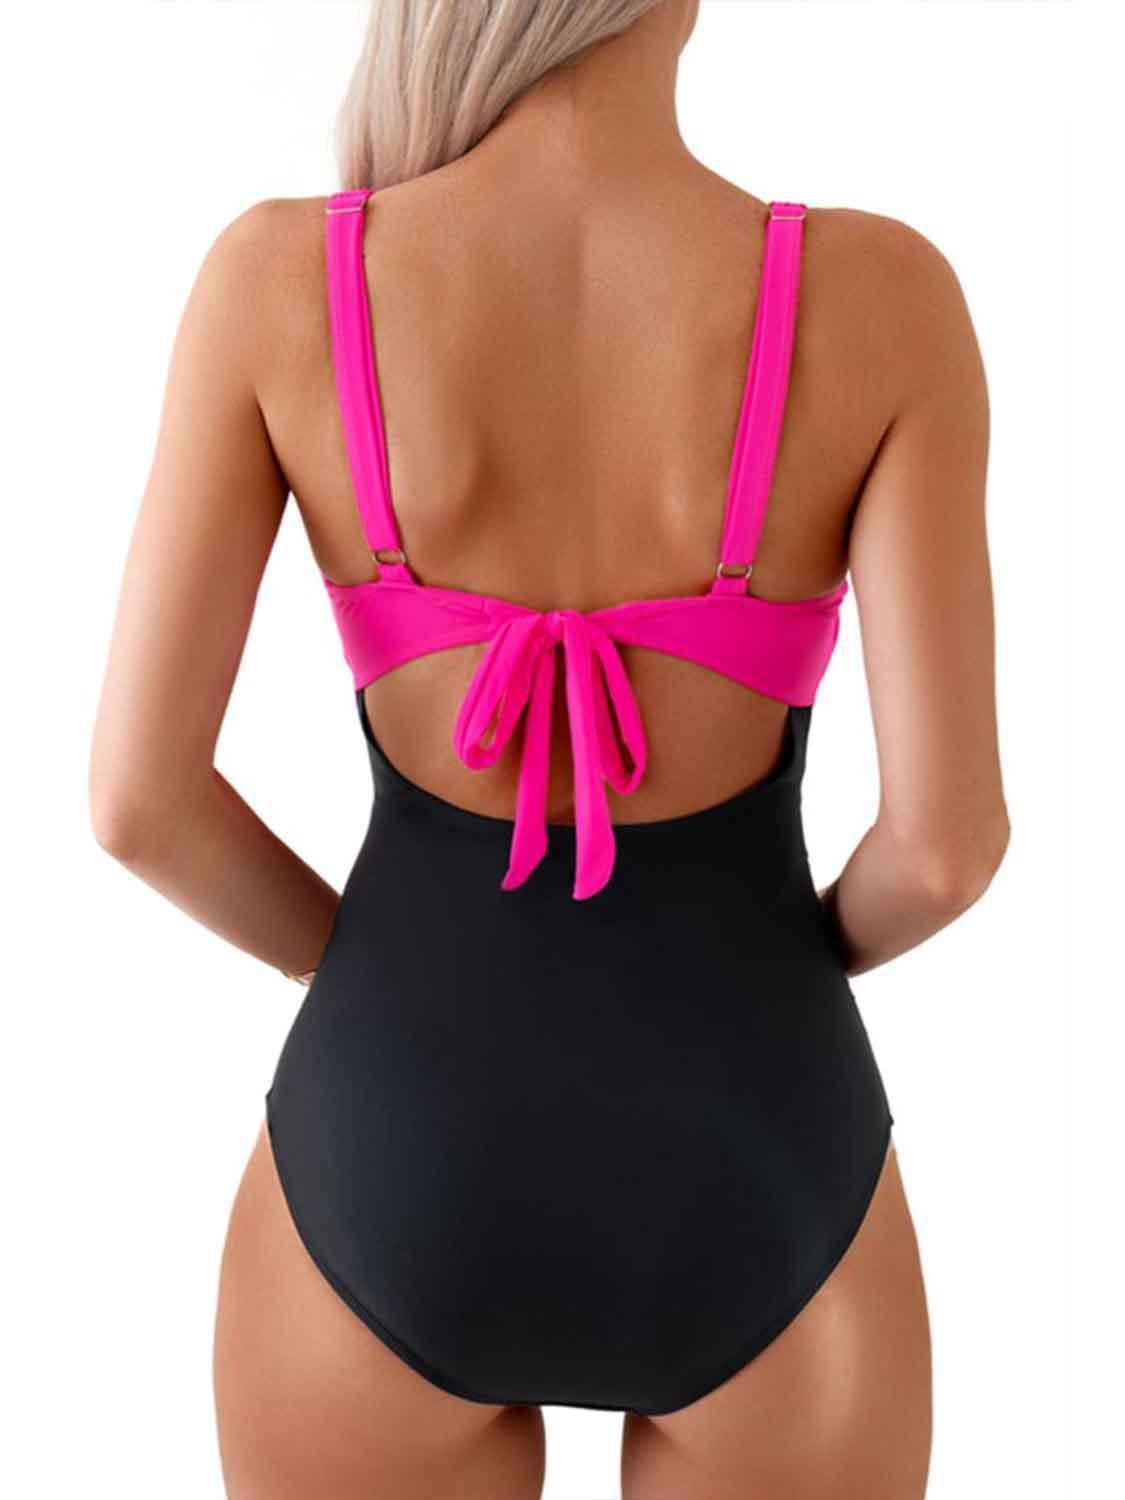 a woman wearing a black and pink one piece swimsuit